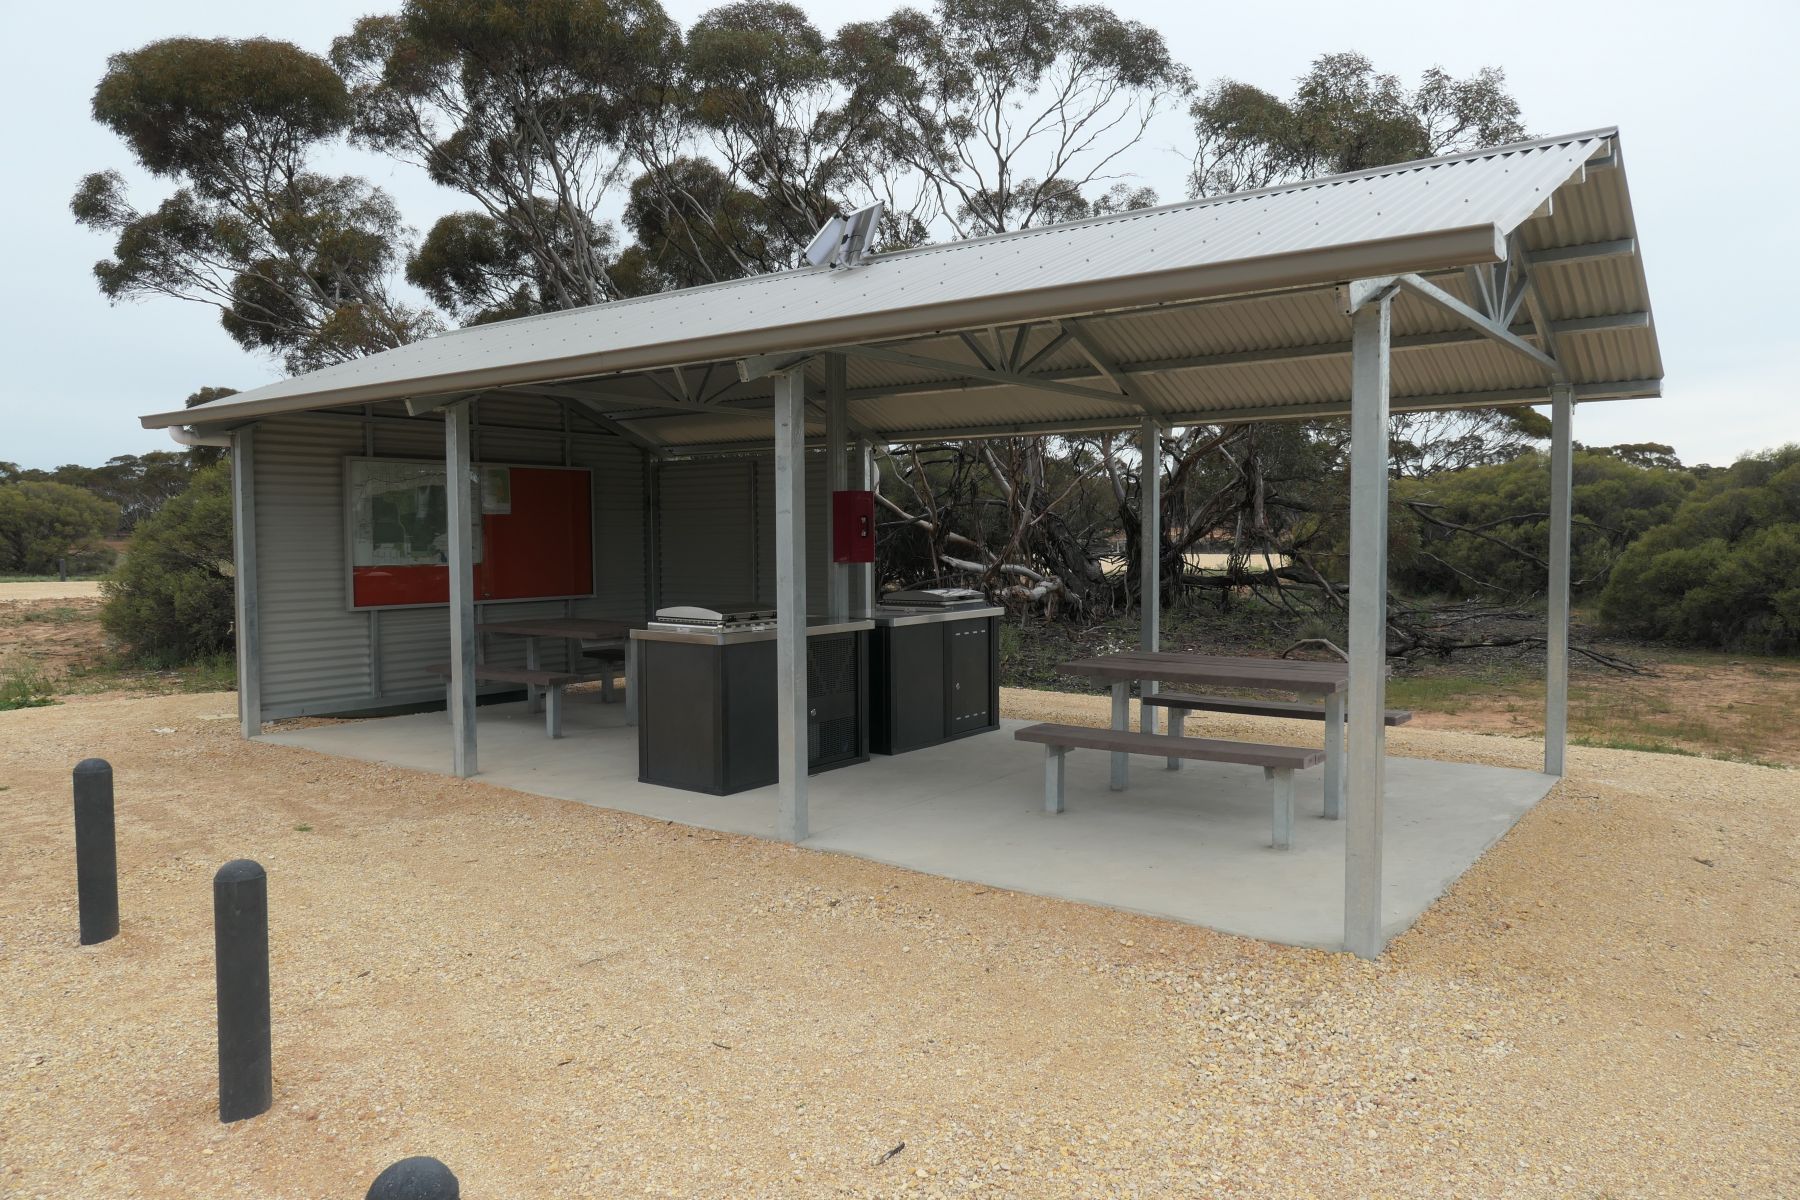 A metal picnic shelter with wooden tables.